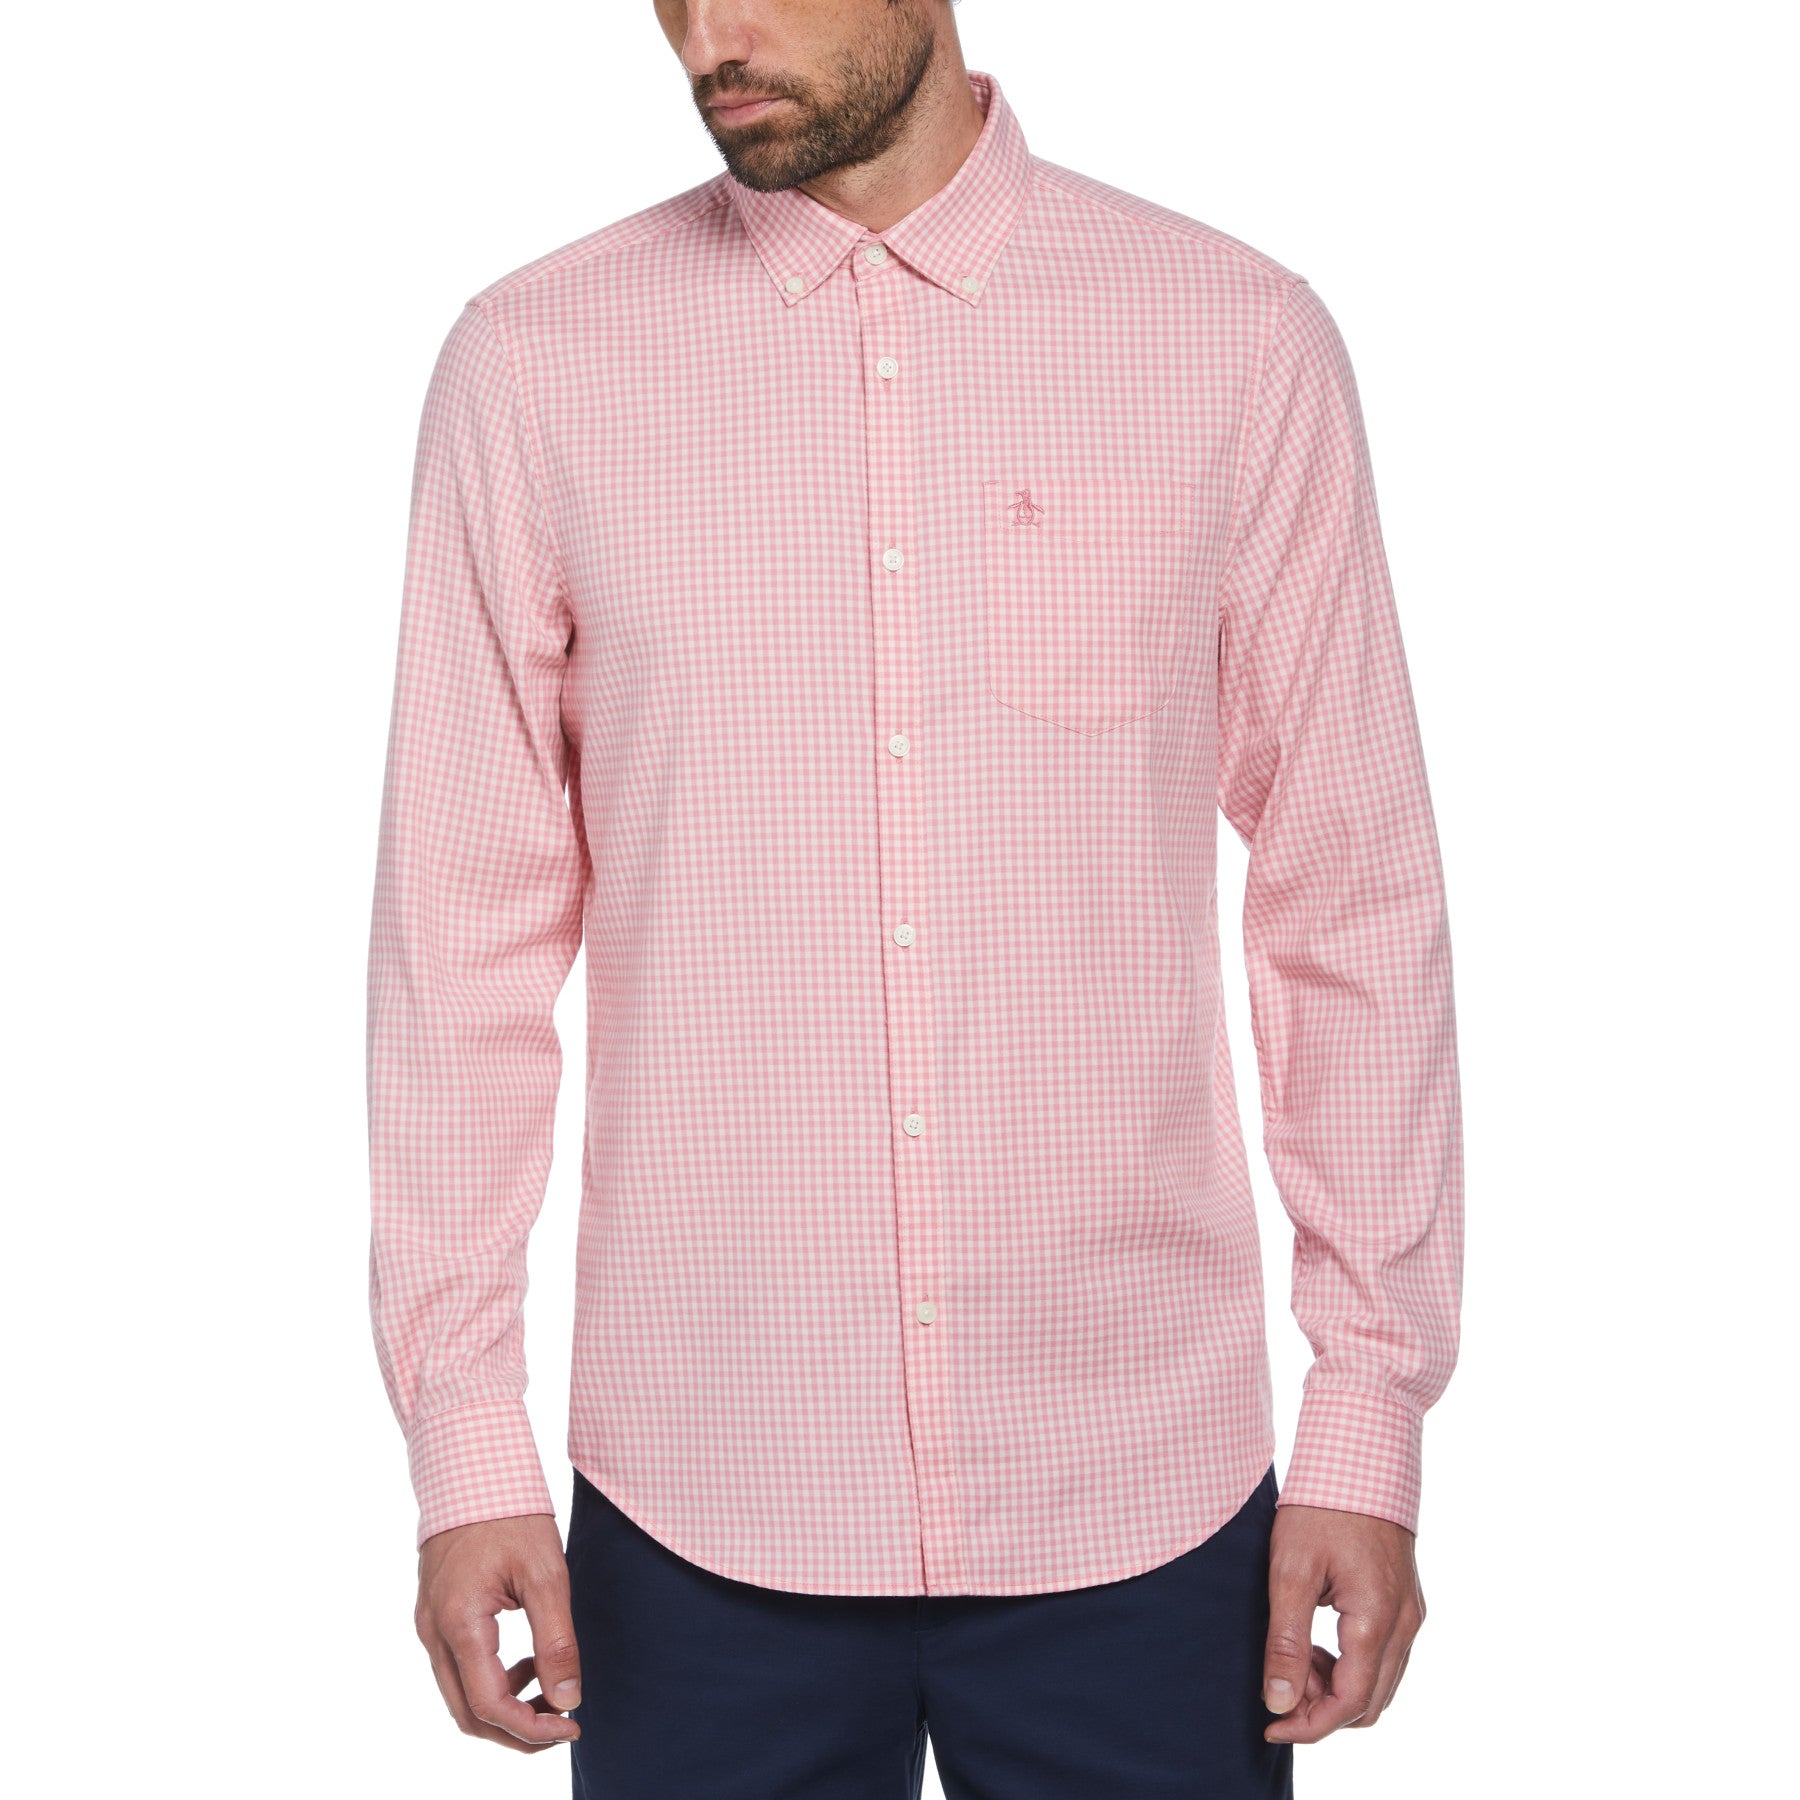 View Gingham Print Long Sleeve Shirt In Wild Rose information